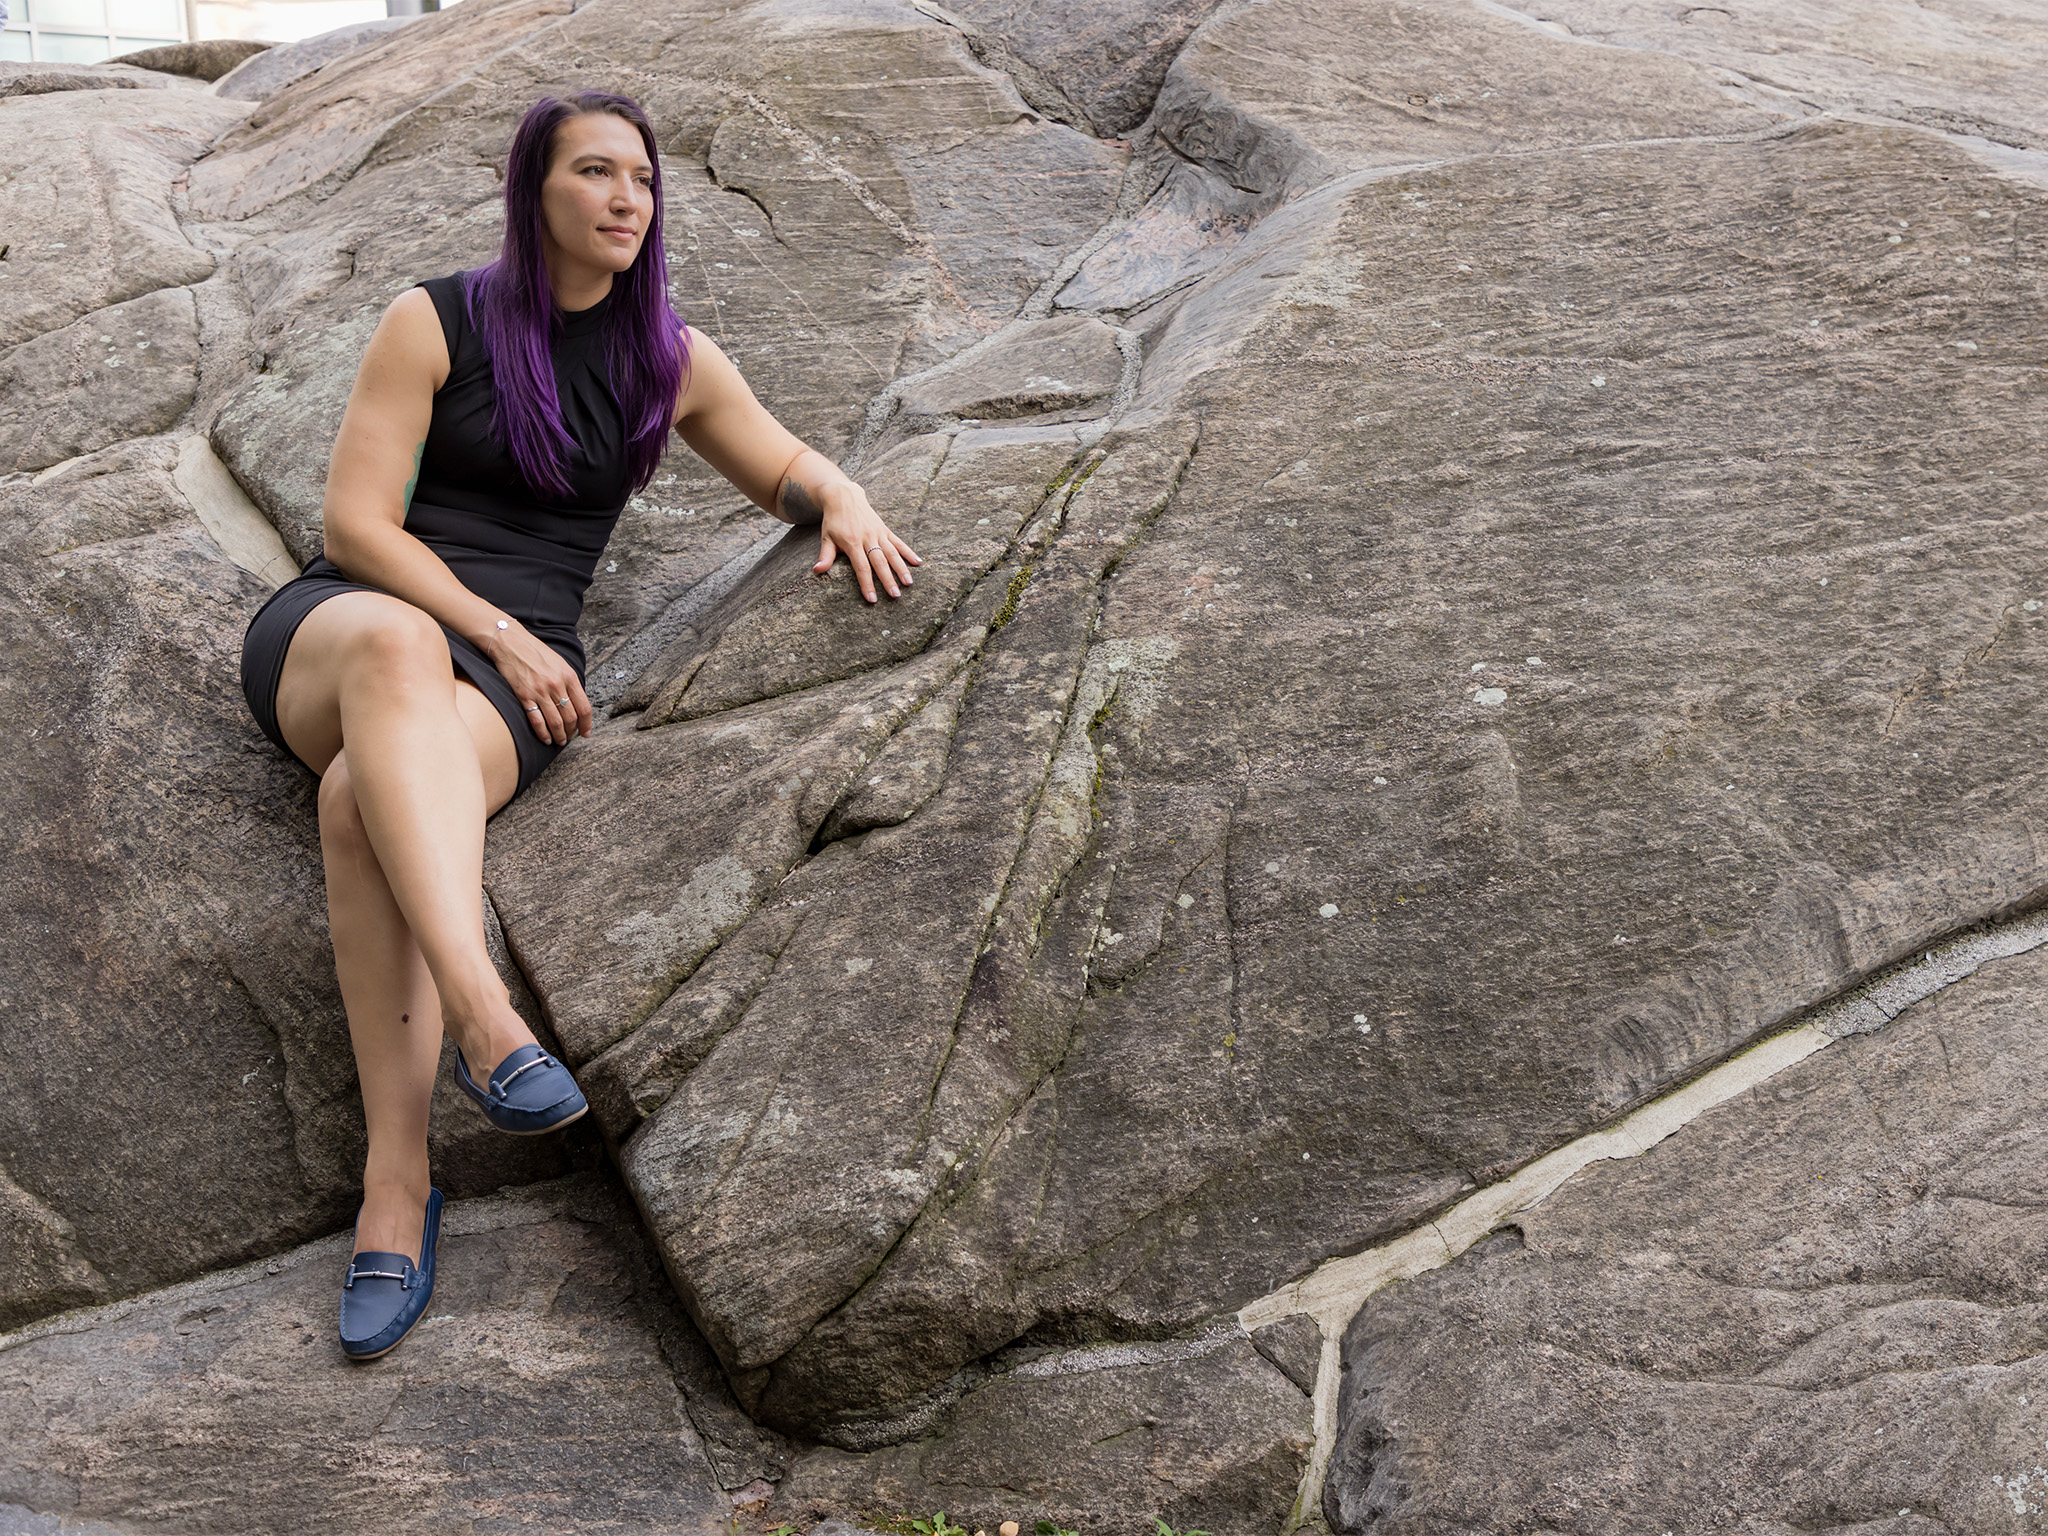 Josephine Morgenroth seated on large rocky area